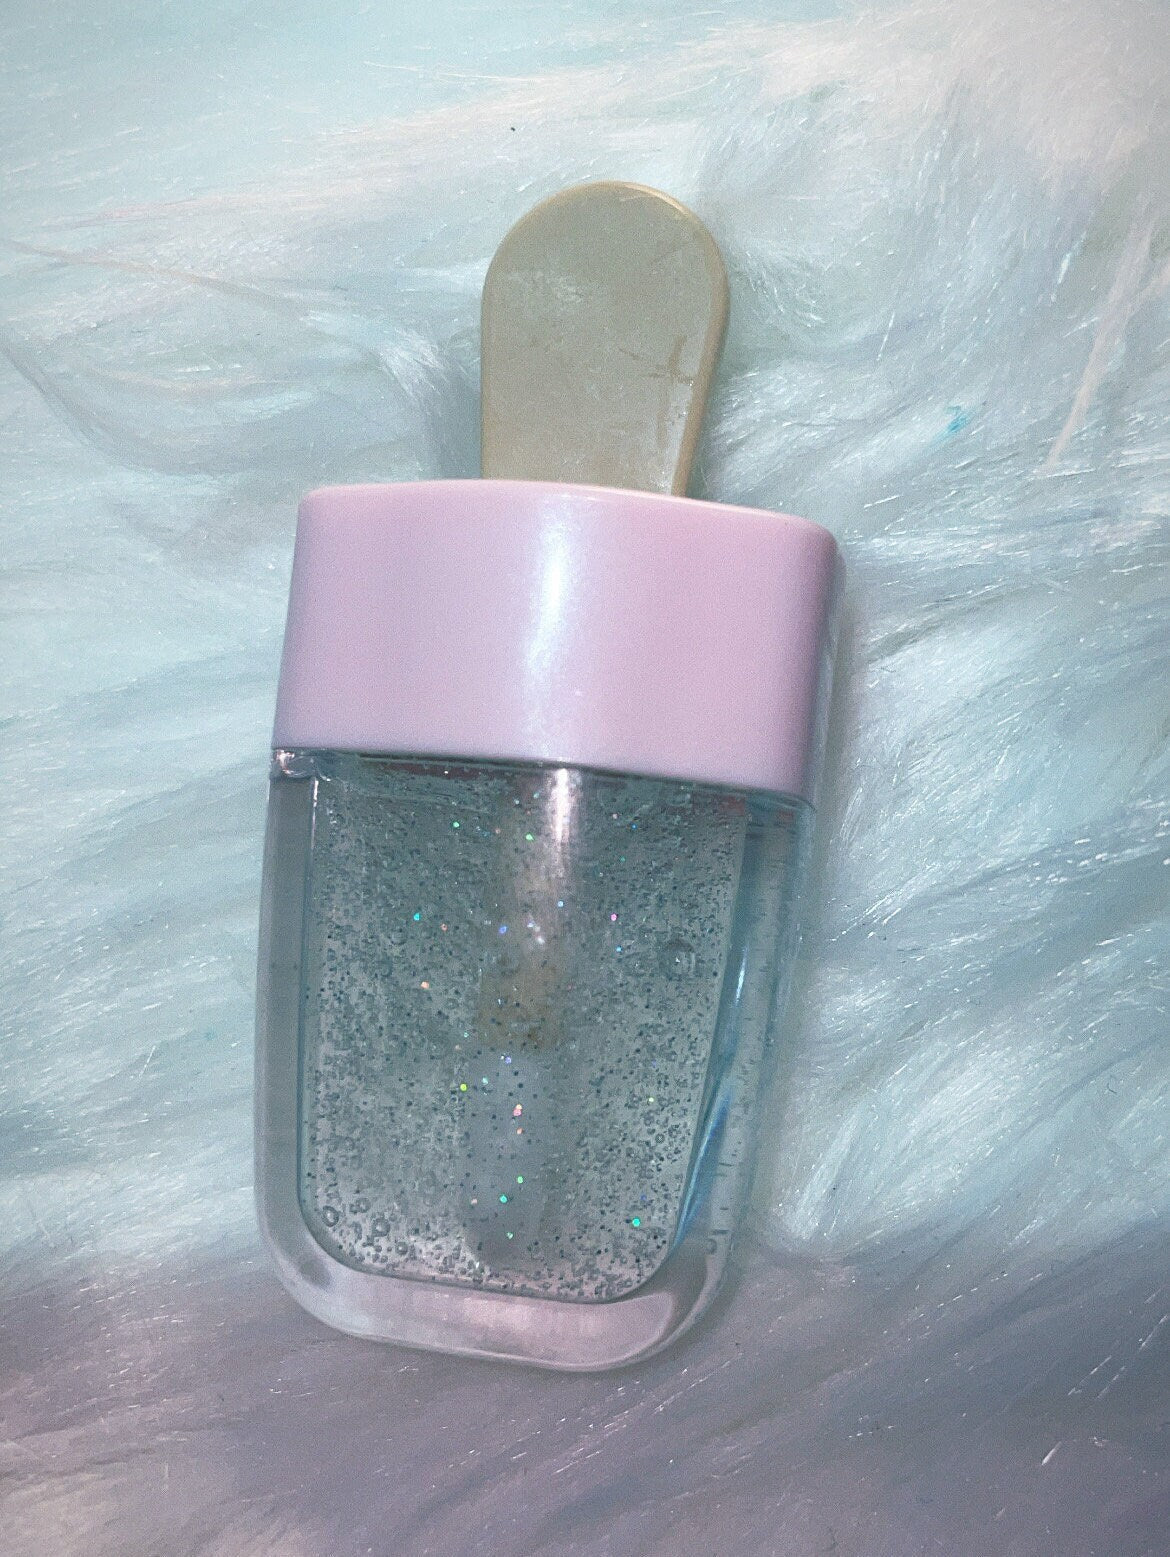 CLEAR lip gloss with glitter